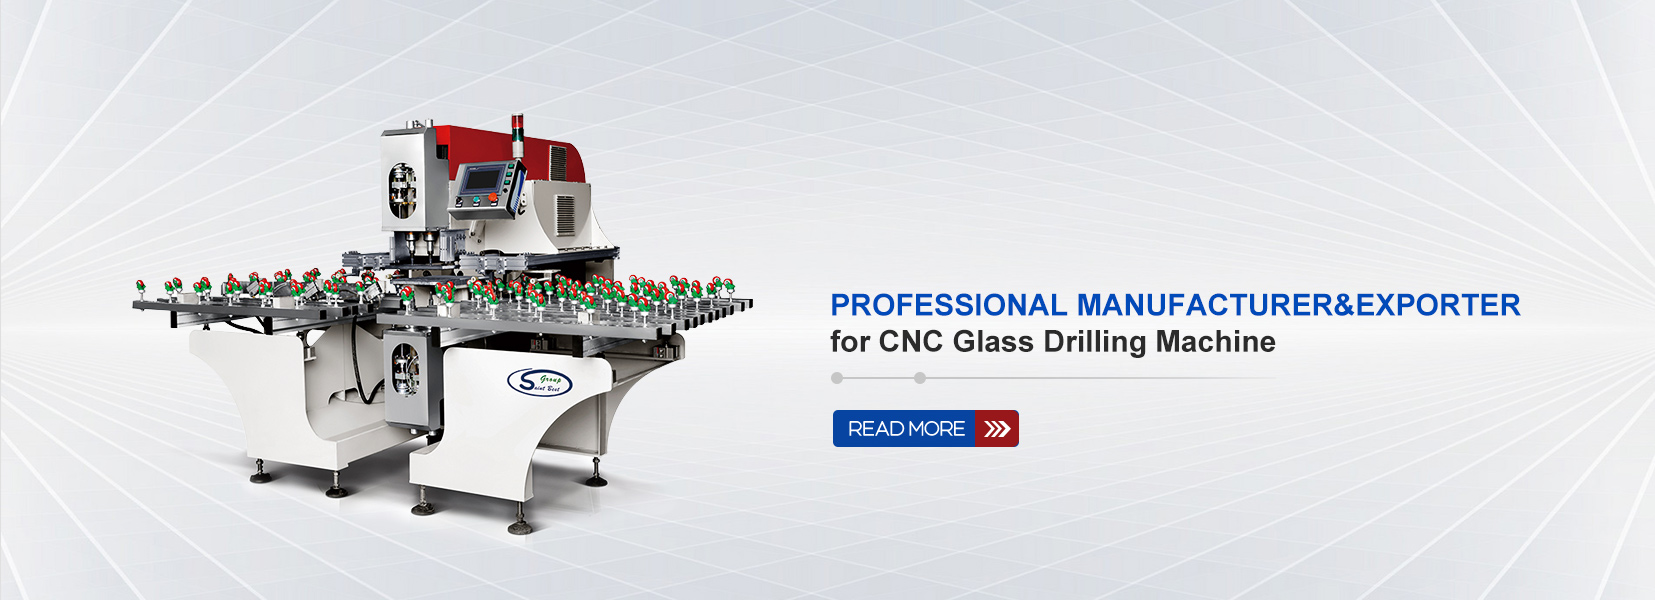 Professional MANUFACTURER&EXPORTER  for CNC Glass Drilling Machine